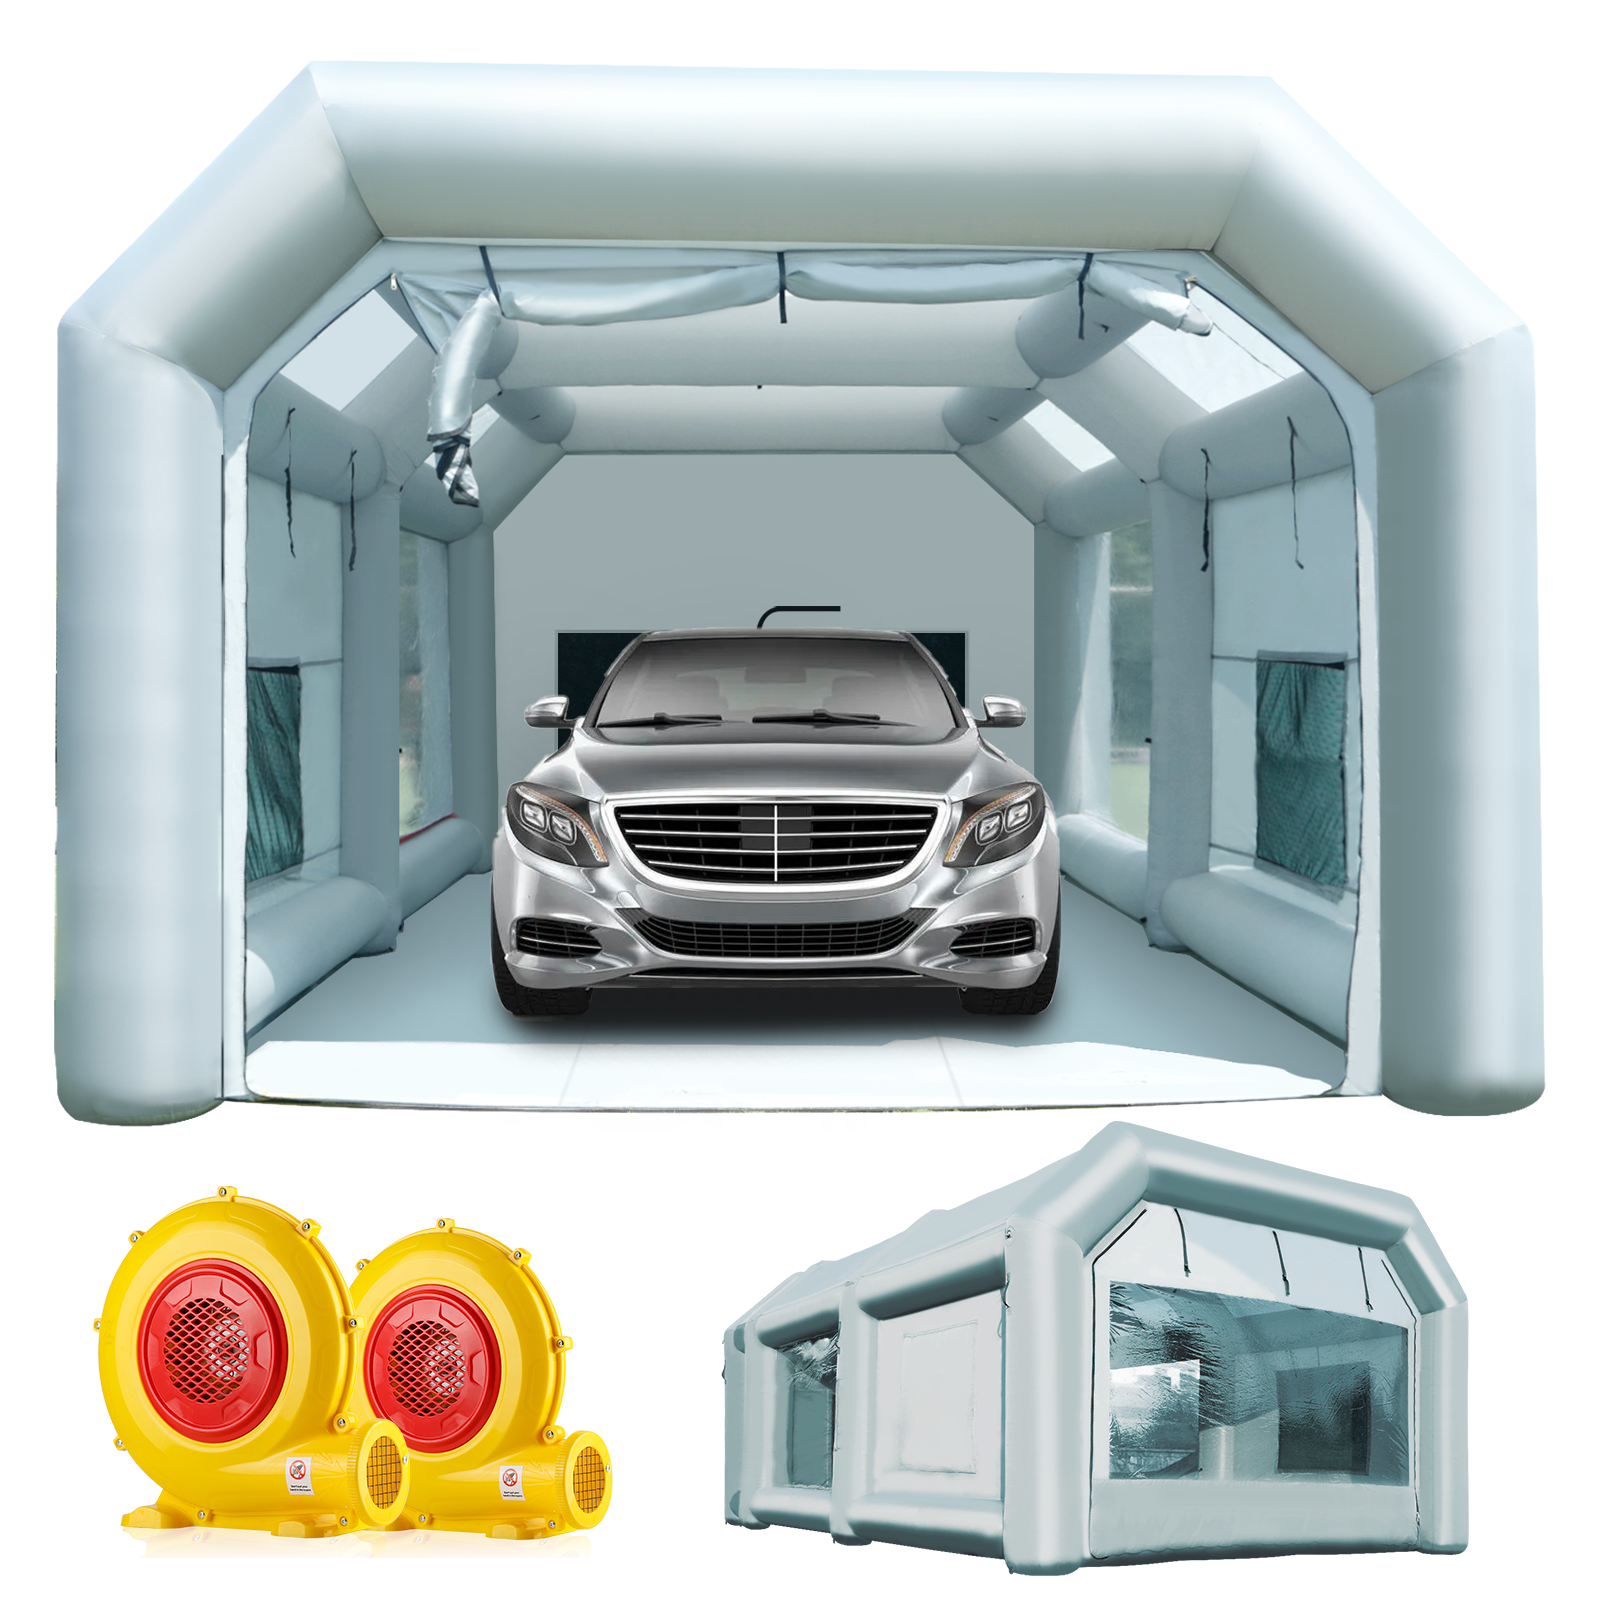 8x4x3m Customized Inflatable Spray Booth Automotive Pop Up Car Clean Paint  Tent Oven Room Care Cloudflare Tunnel House With Filter Systems From  Sportsparadise, $987.25